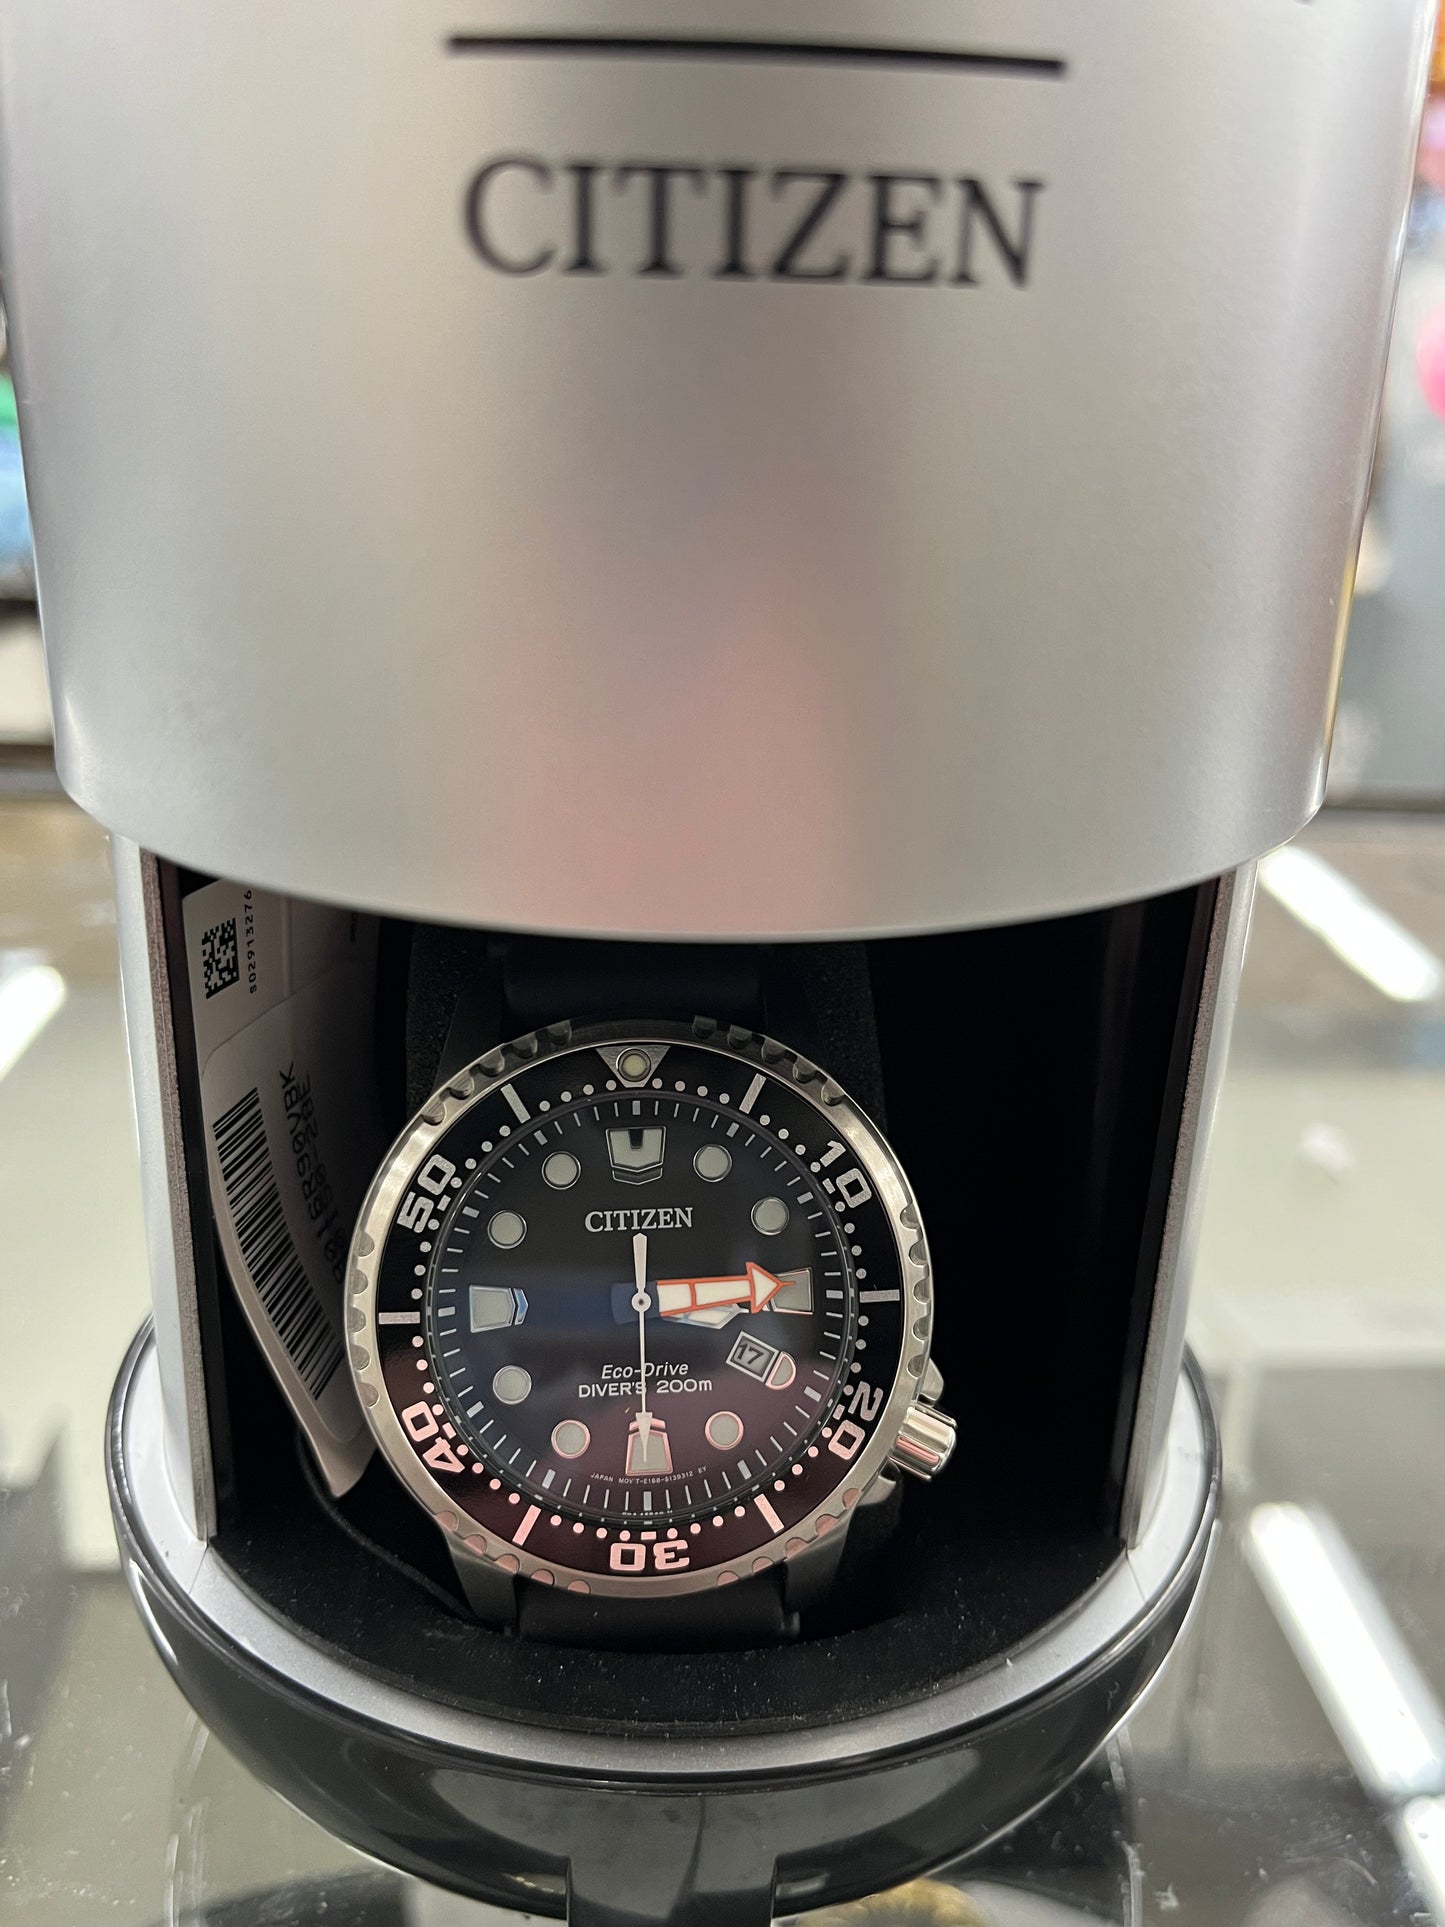 Citizen Promaster Dive Eco-Drive Watch, 3-Hand Date, ISO Certified, Luminous Hands and Markers, Rotating Bezel